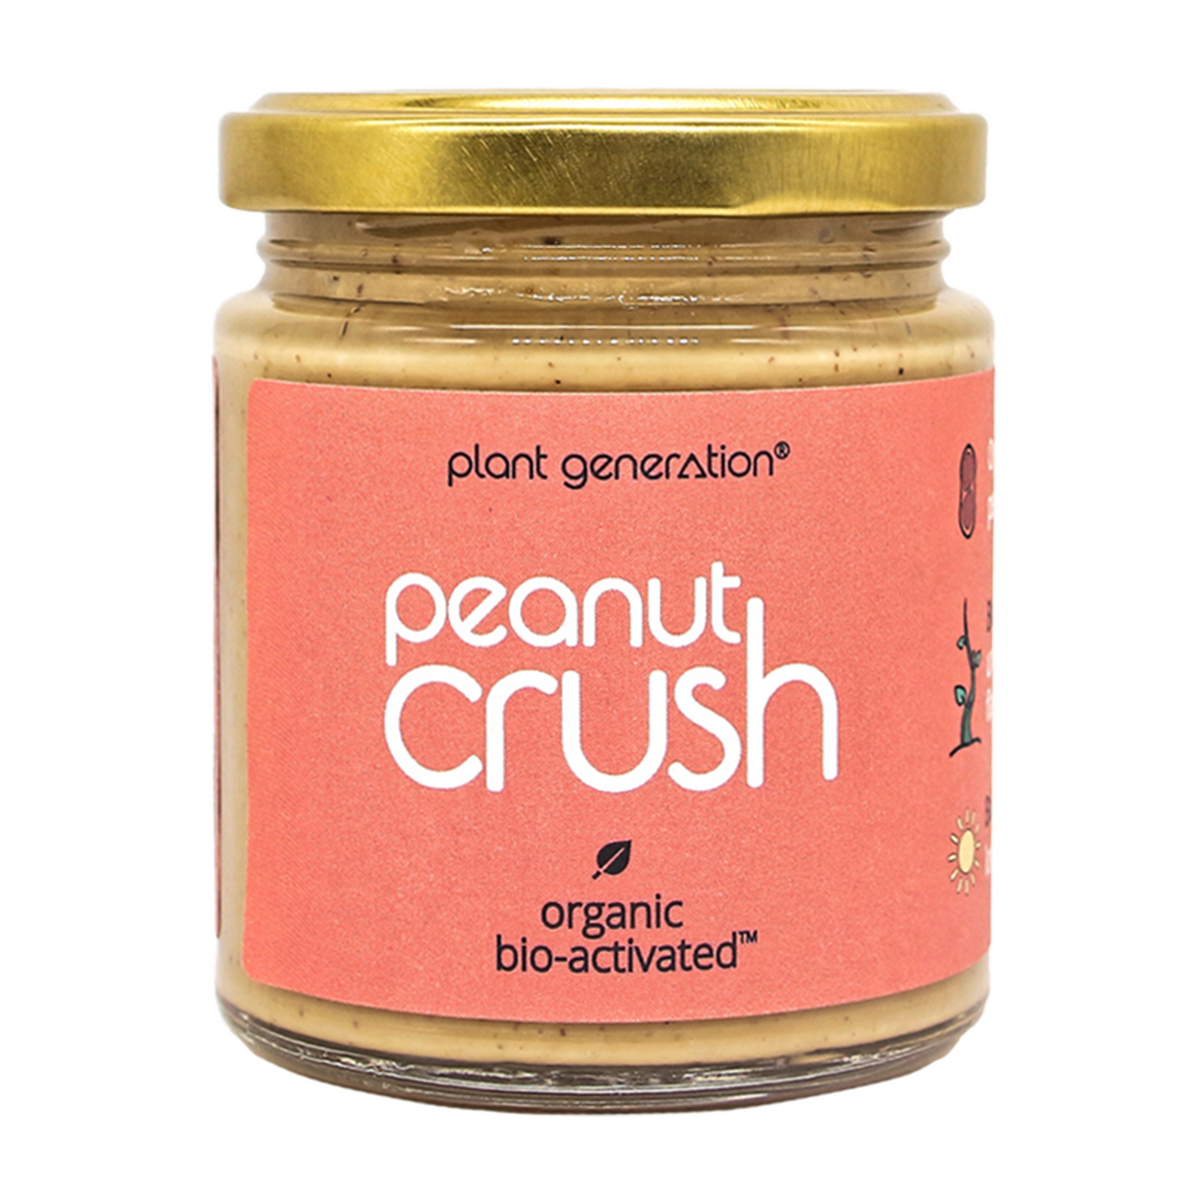 Peanut Crush (170g, 500g) | Plant Generation | Raw Living UK | Plant Generation Bio-Activated Peanut Crush Vegan Sugar-Free Nut Butter captures the authentic flavour of Peanuts. Rich in vitamins &amp; minerals.